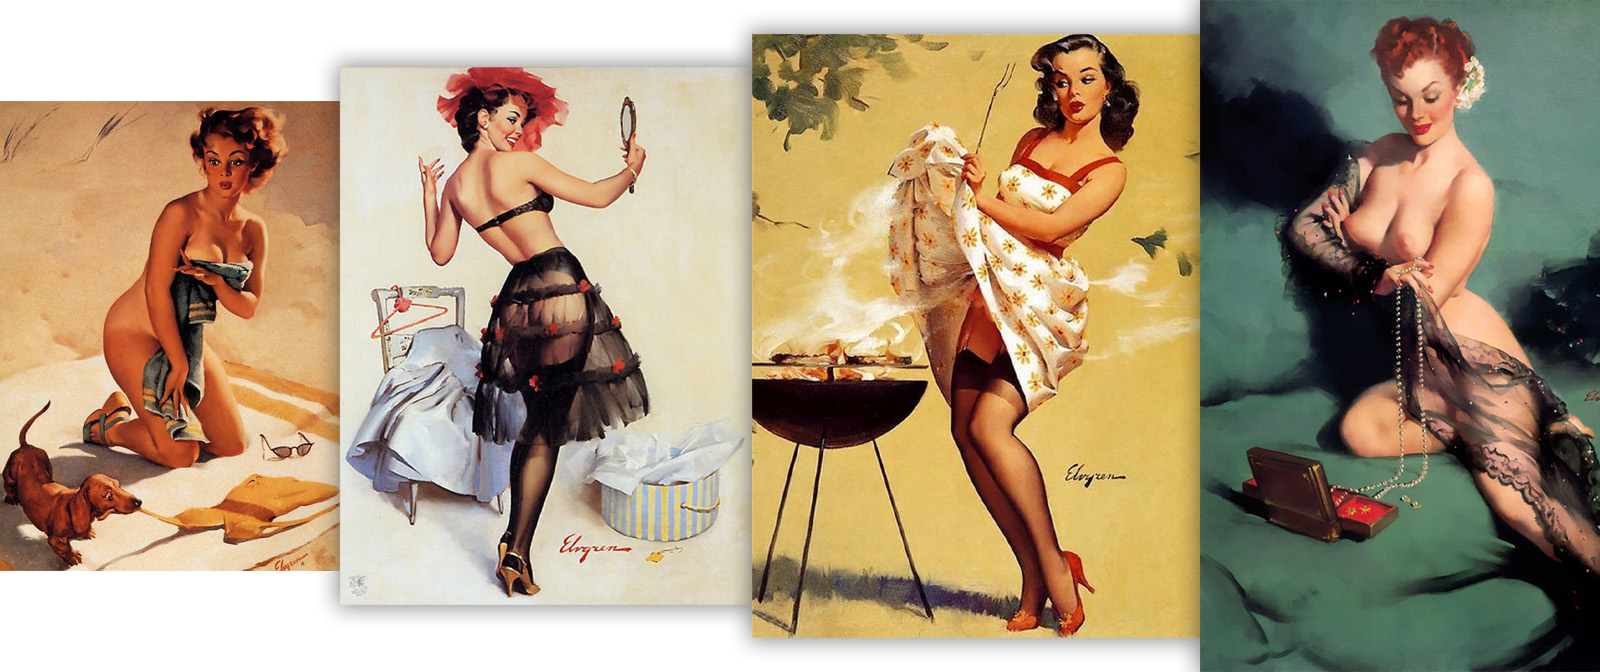 The immodest illustrations of pin-up master Gil Elvgren that still excite all men today